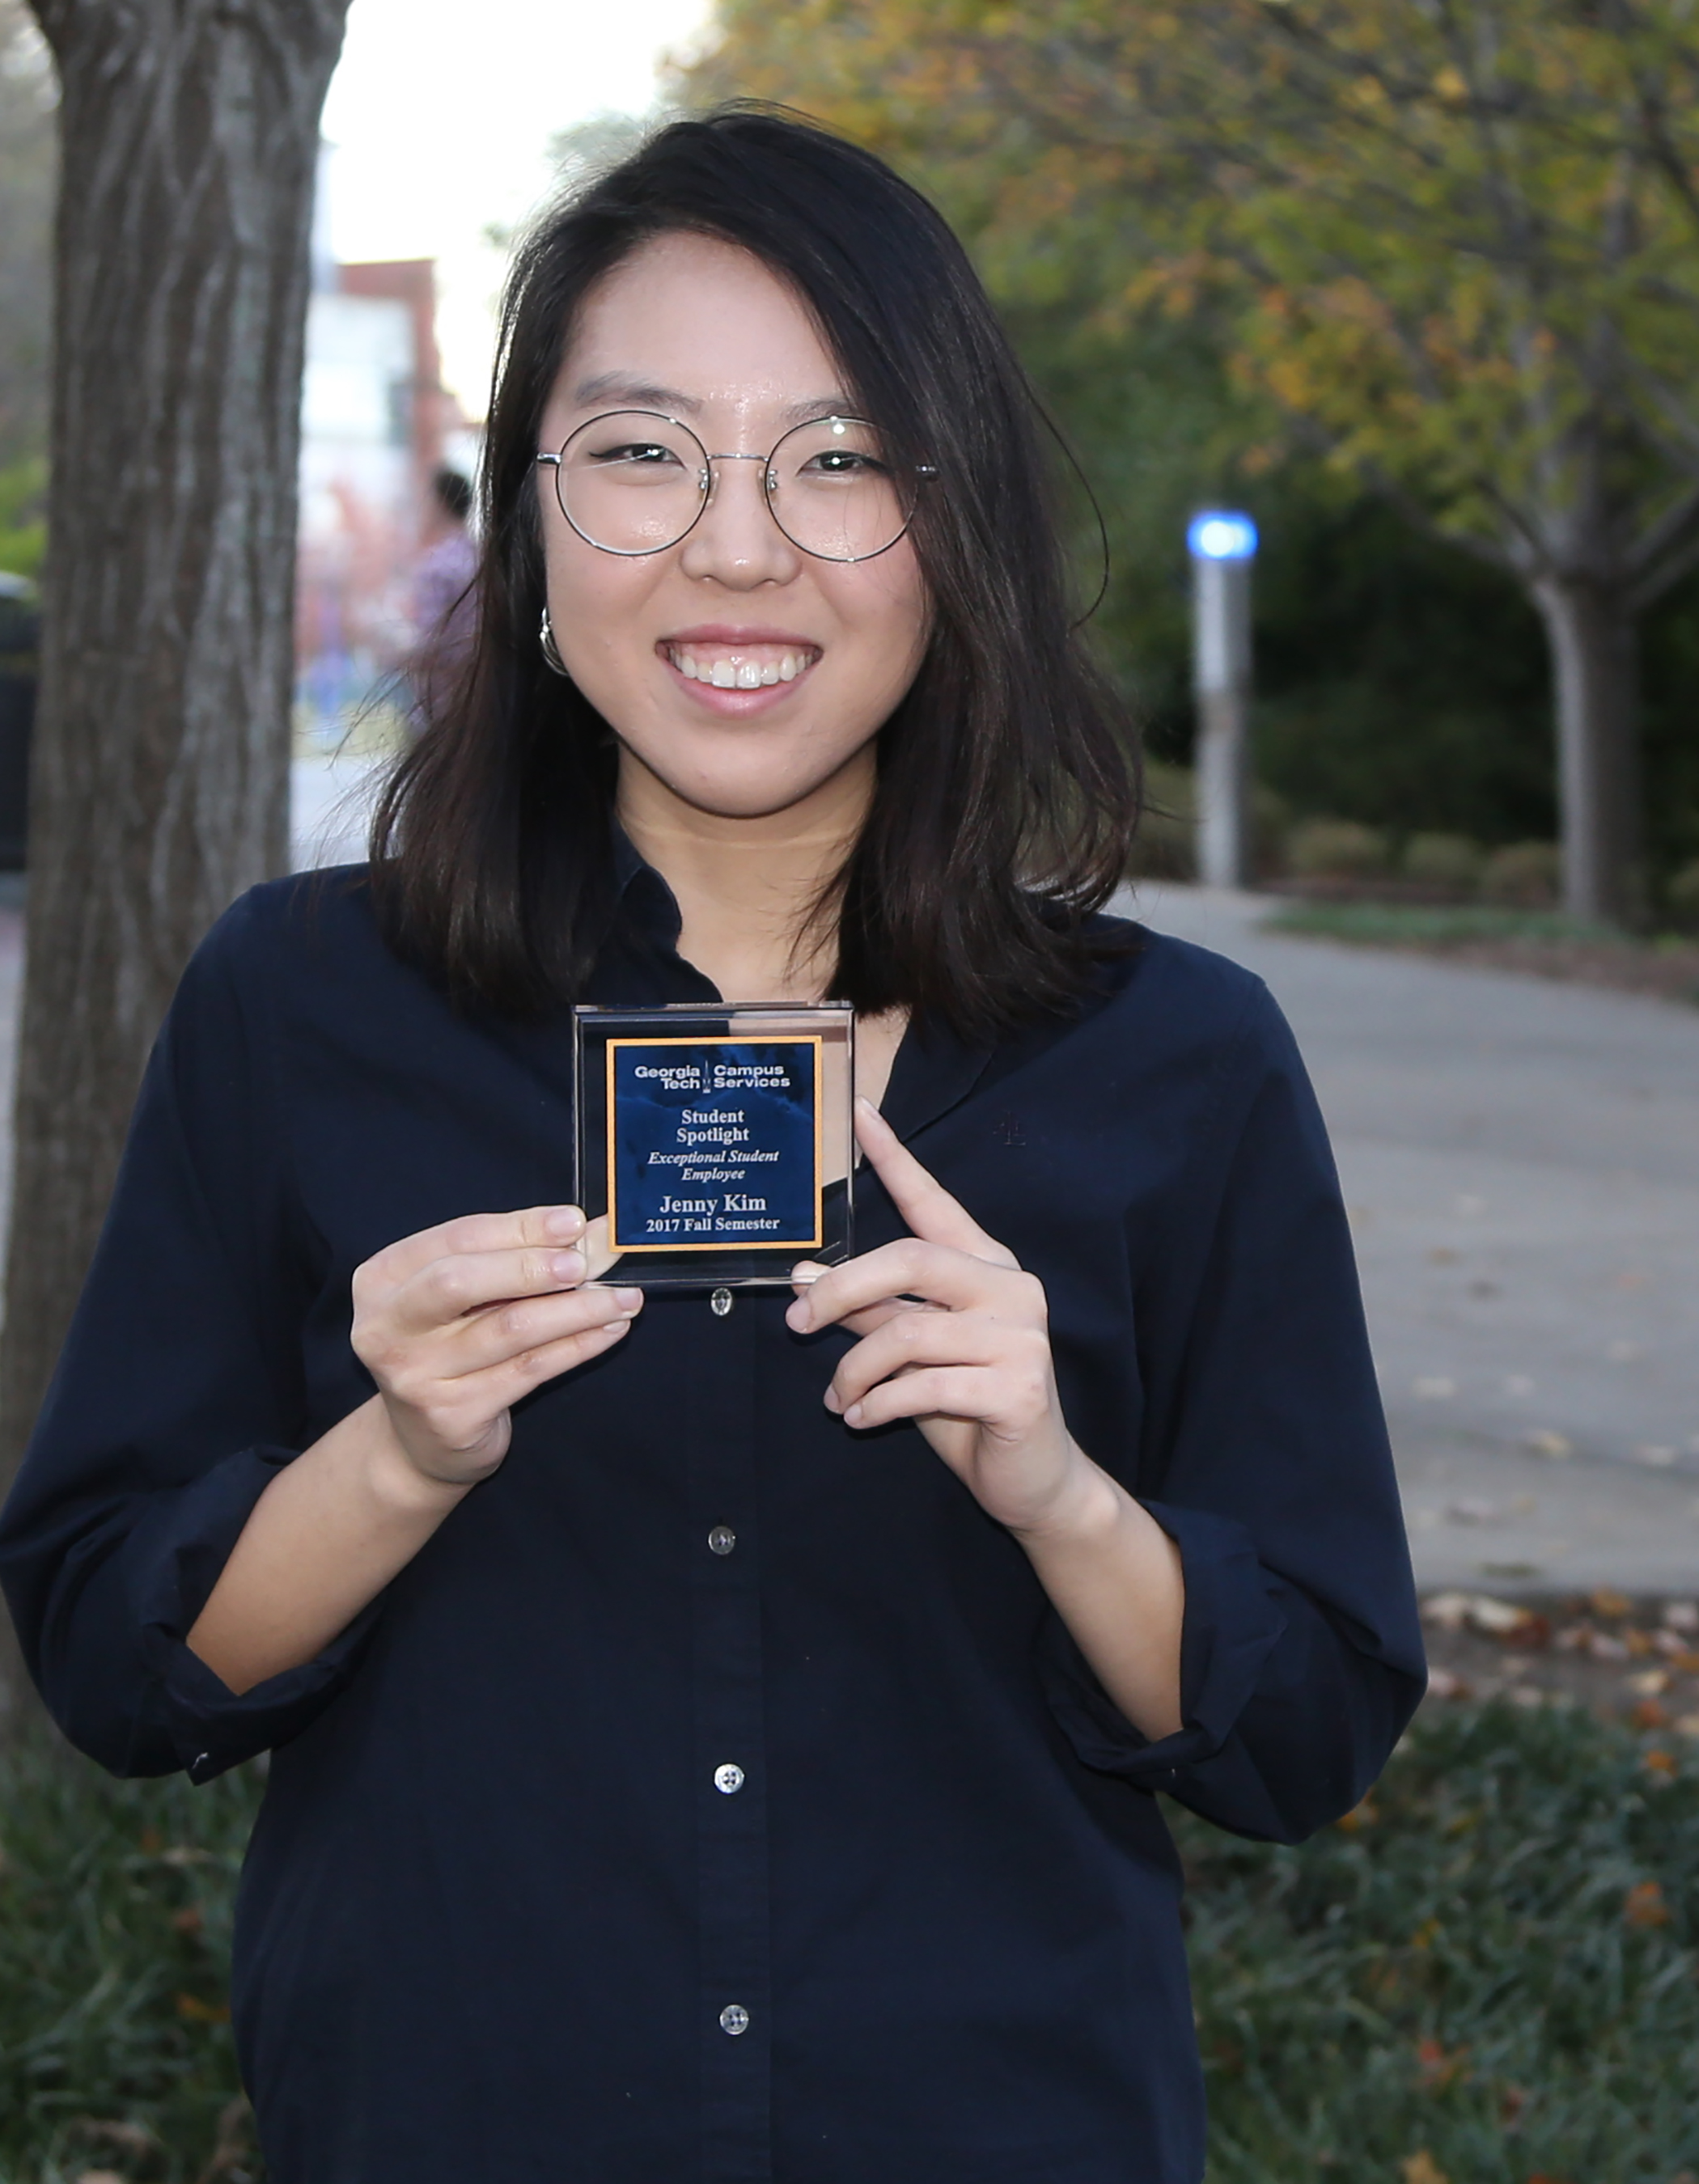 Picture of Jenny Kim, Campus Services Student Spotlight for Fall 2017